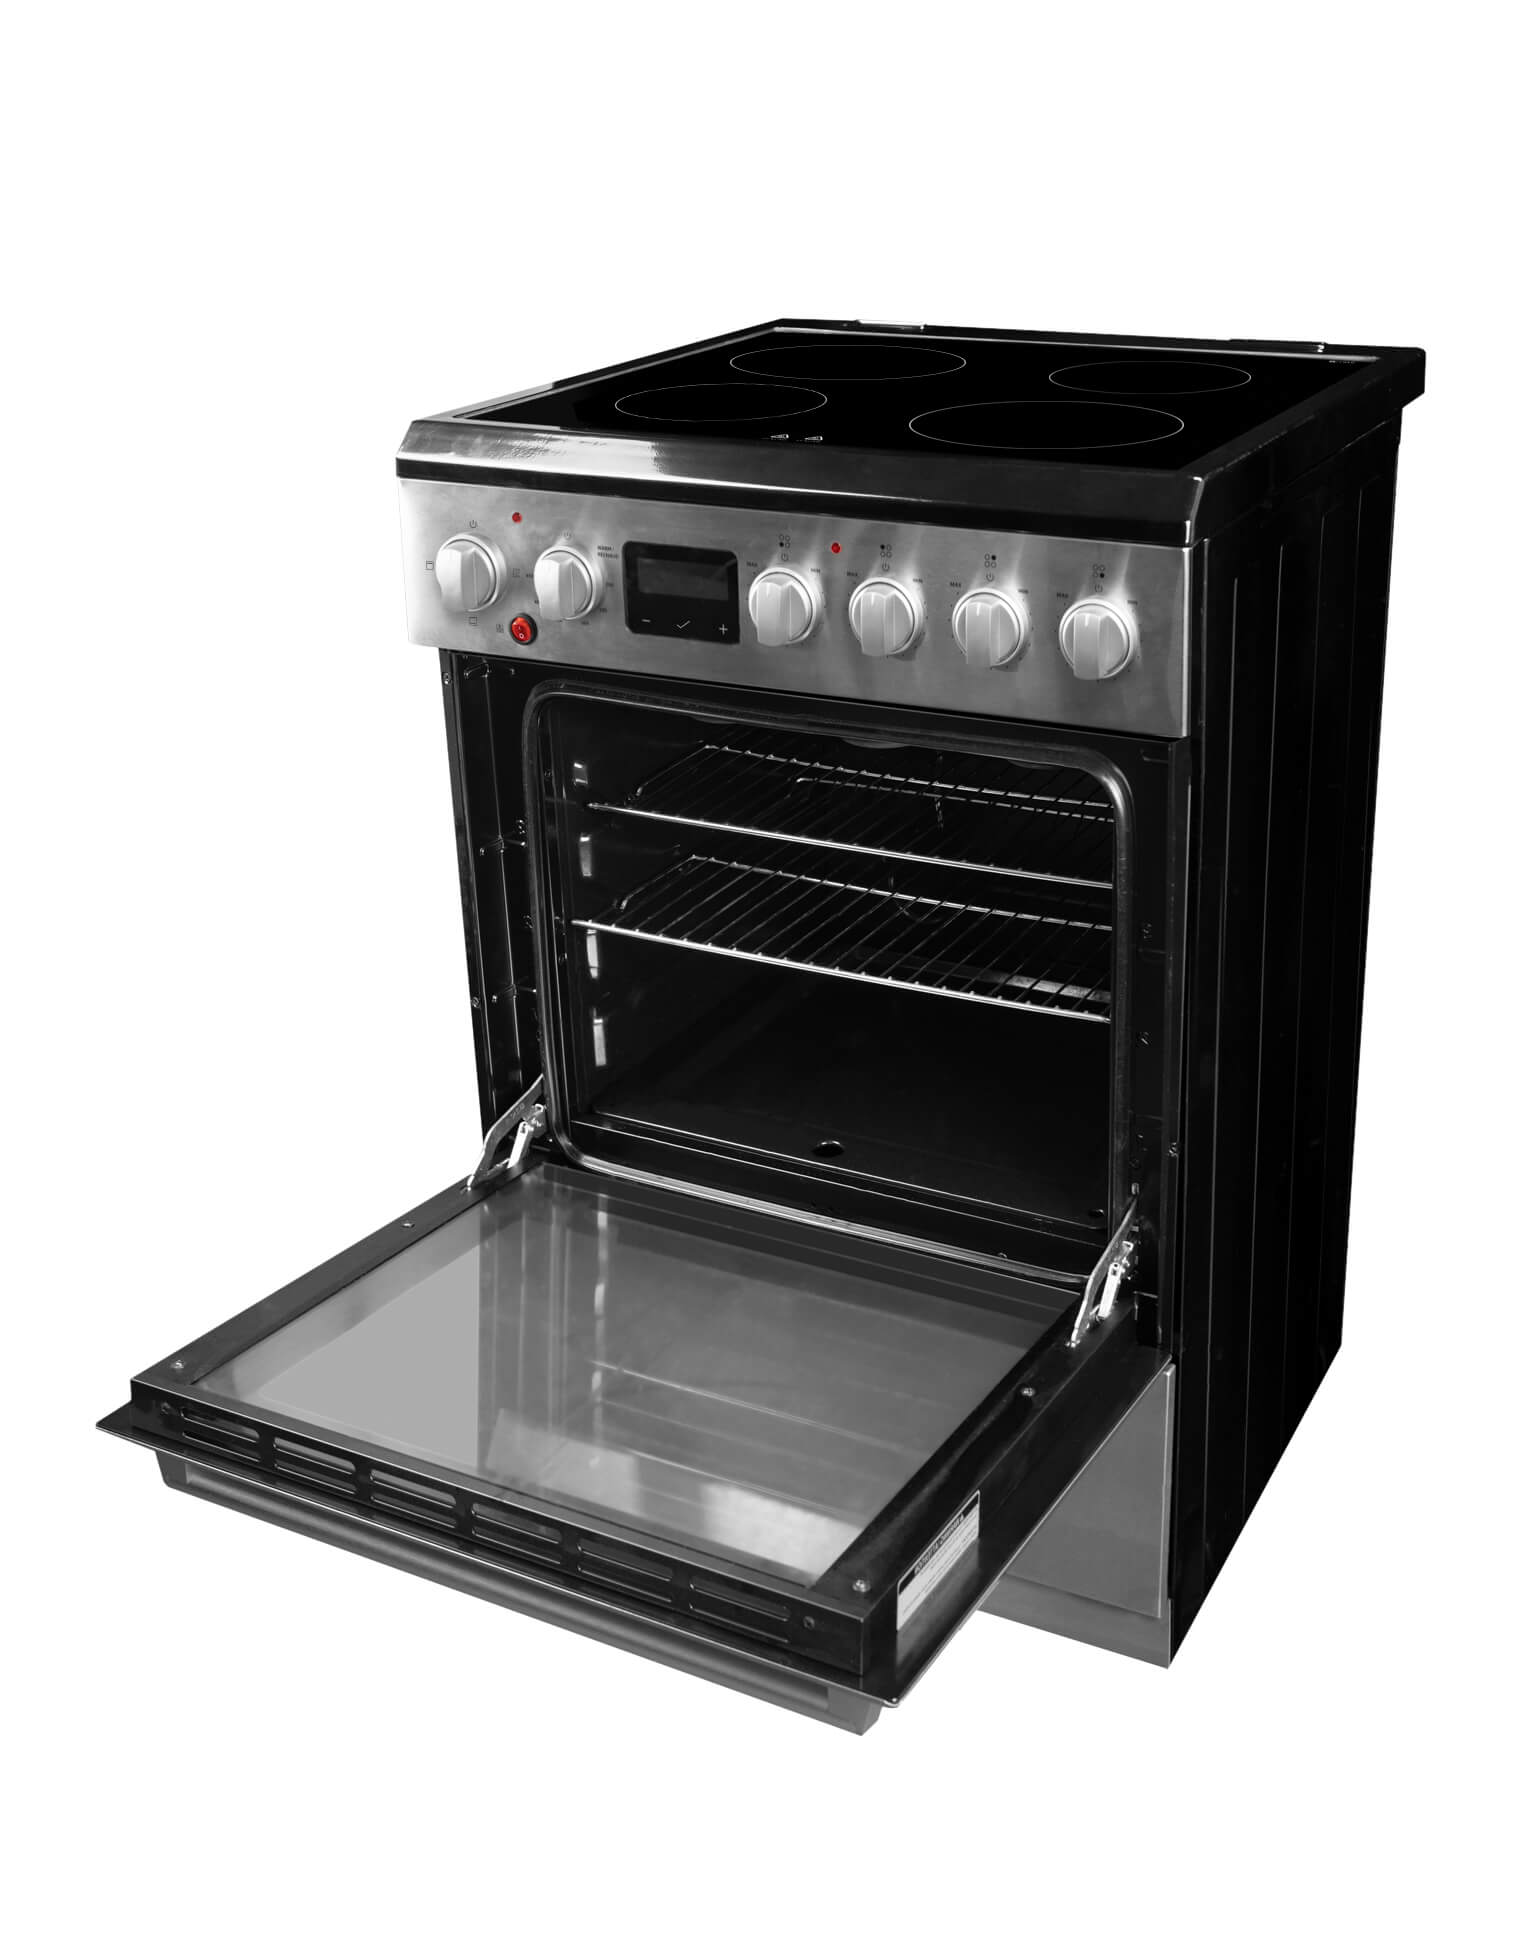 Danby - 24" Slide-In Smooth Top Range, ADA Compliant, Airfry, Manual Clean Ranges - DRCA240BSS